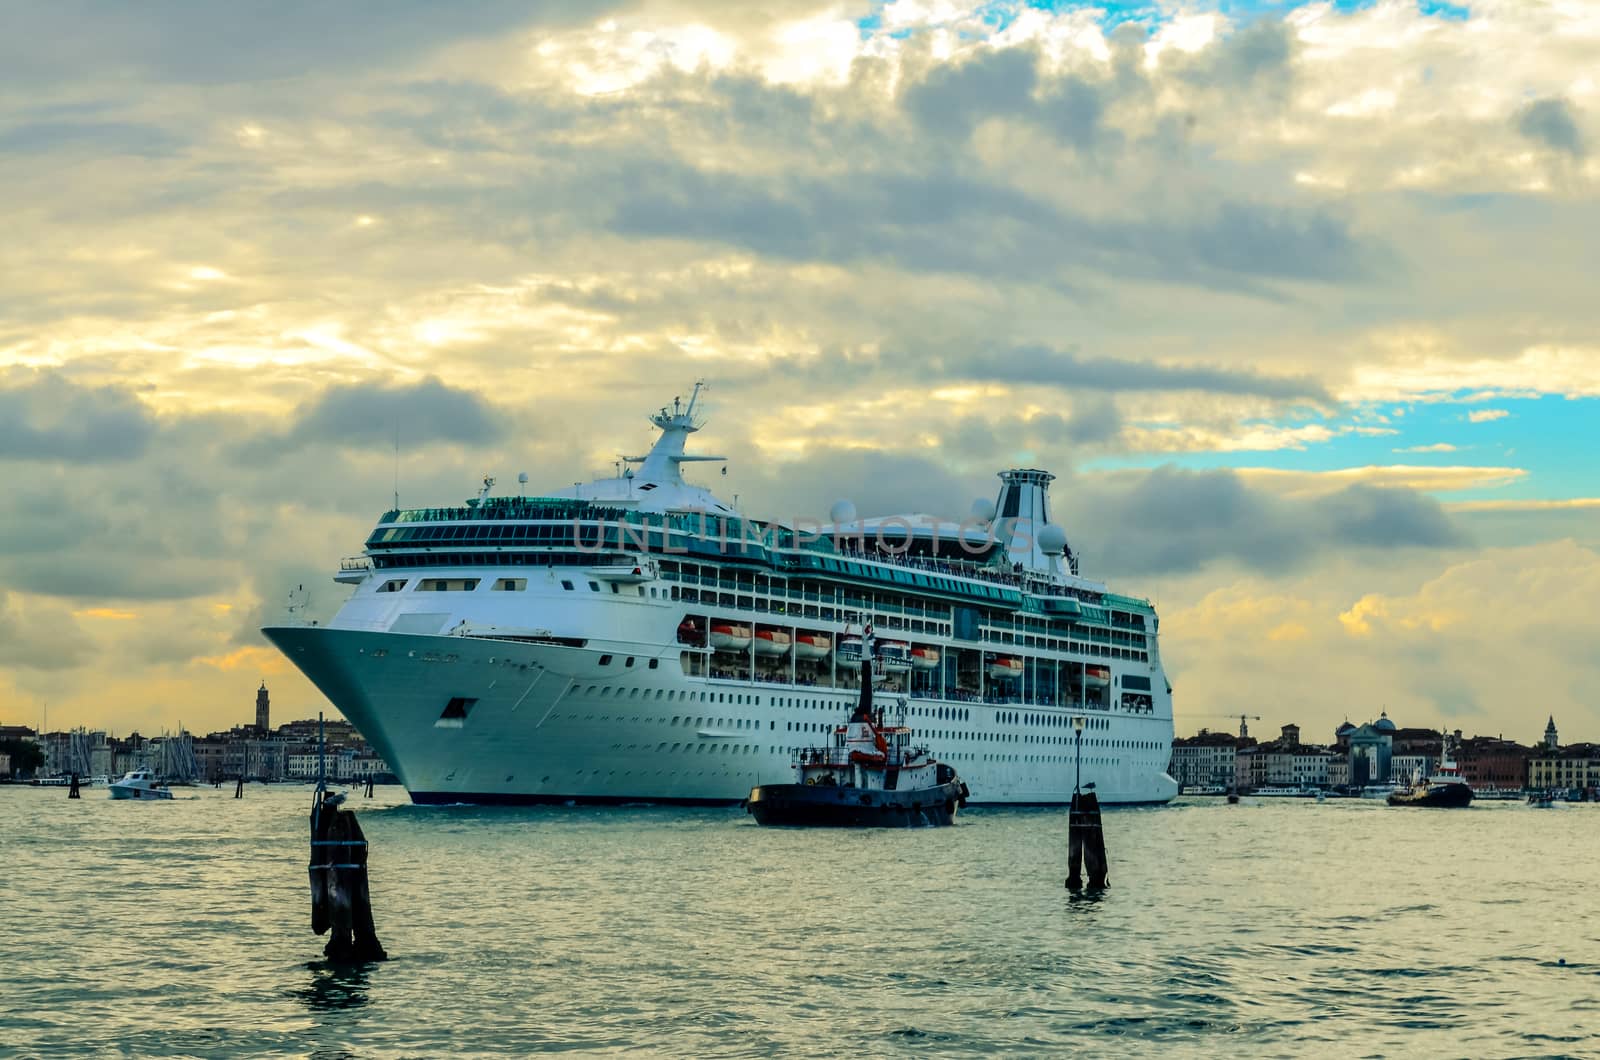 A large beautiful cruise ship leaves the port of Venice, Italy by chernobrovin